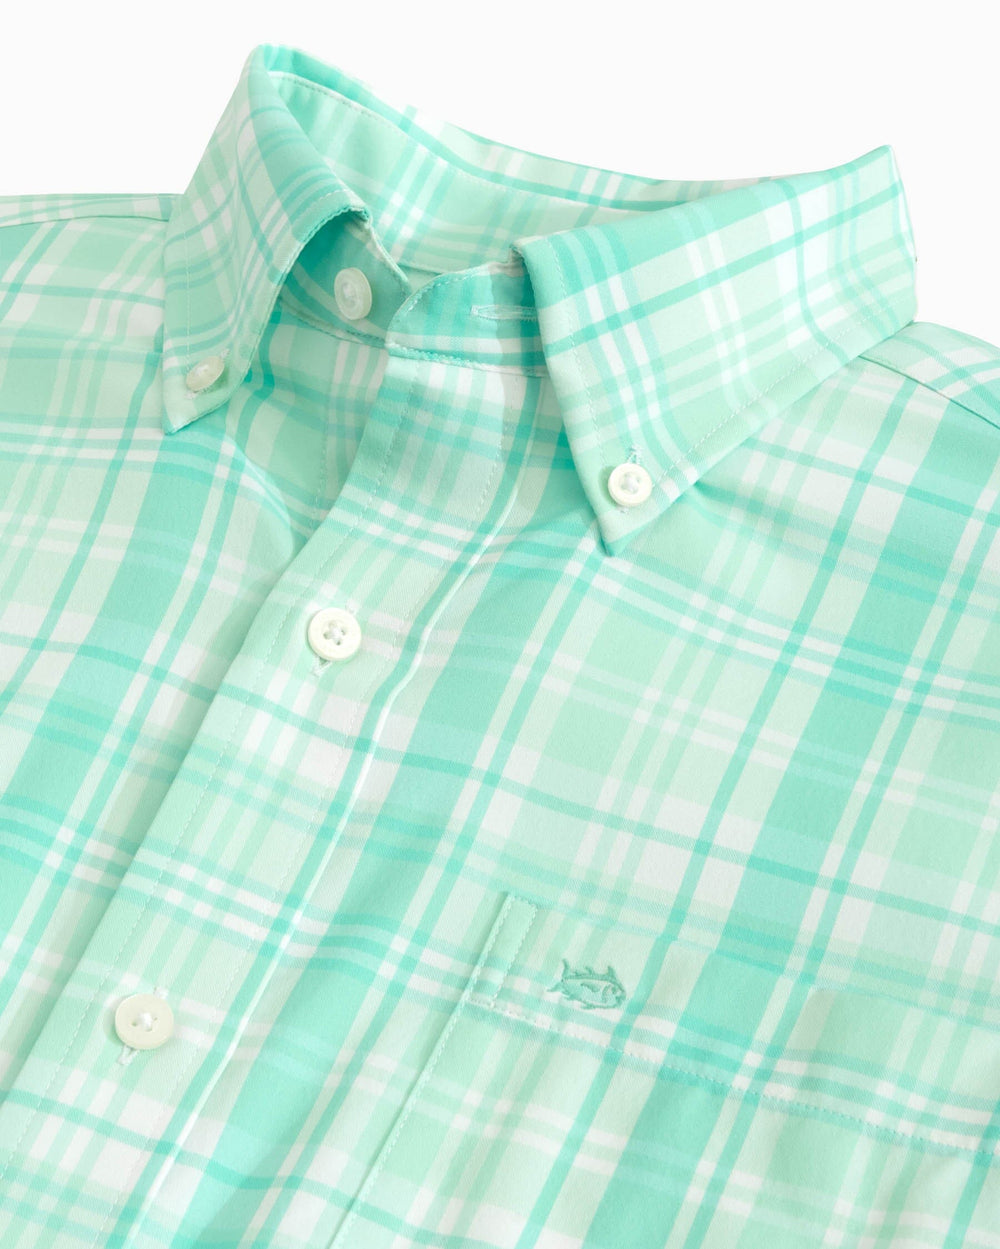 The detail view of the Southern Tide Palm Cayon Plaid Intercoastal Sport Shirts by Southern Tide - Baltic Teal